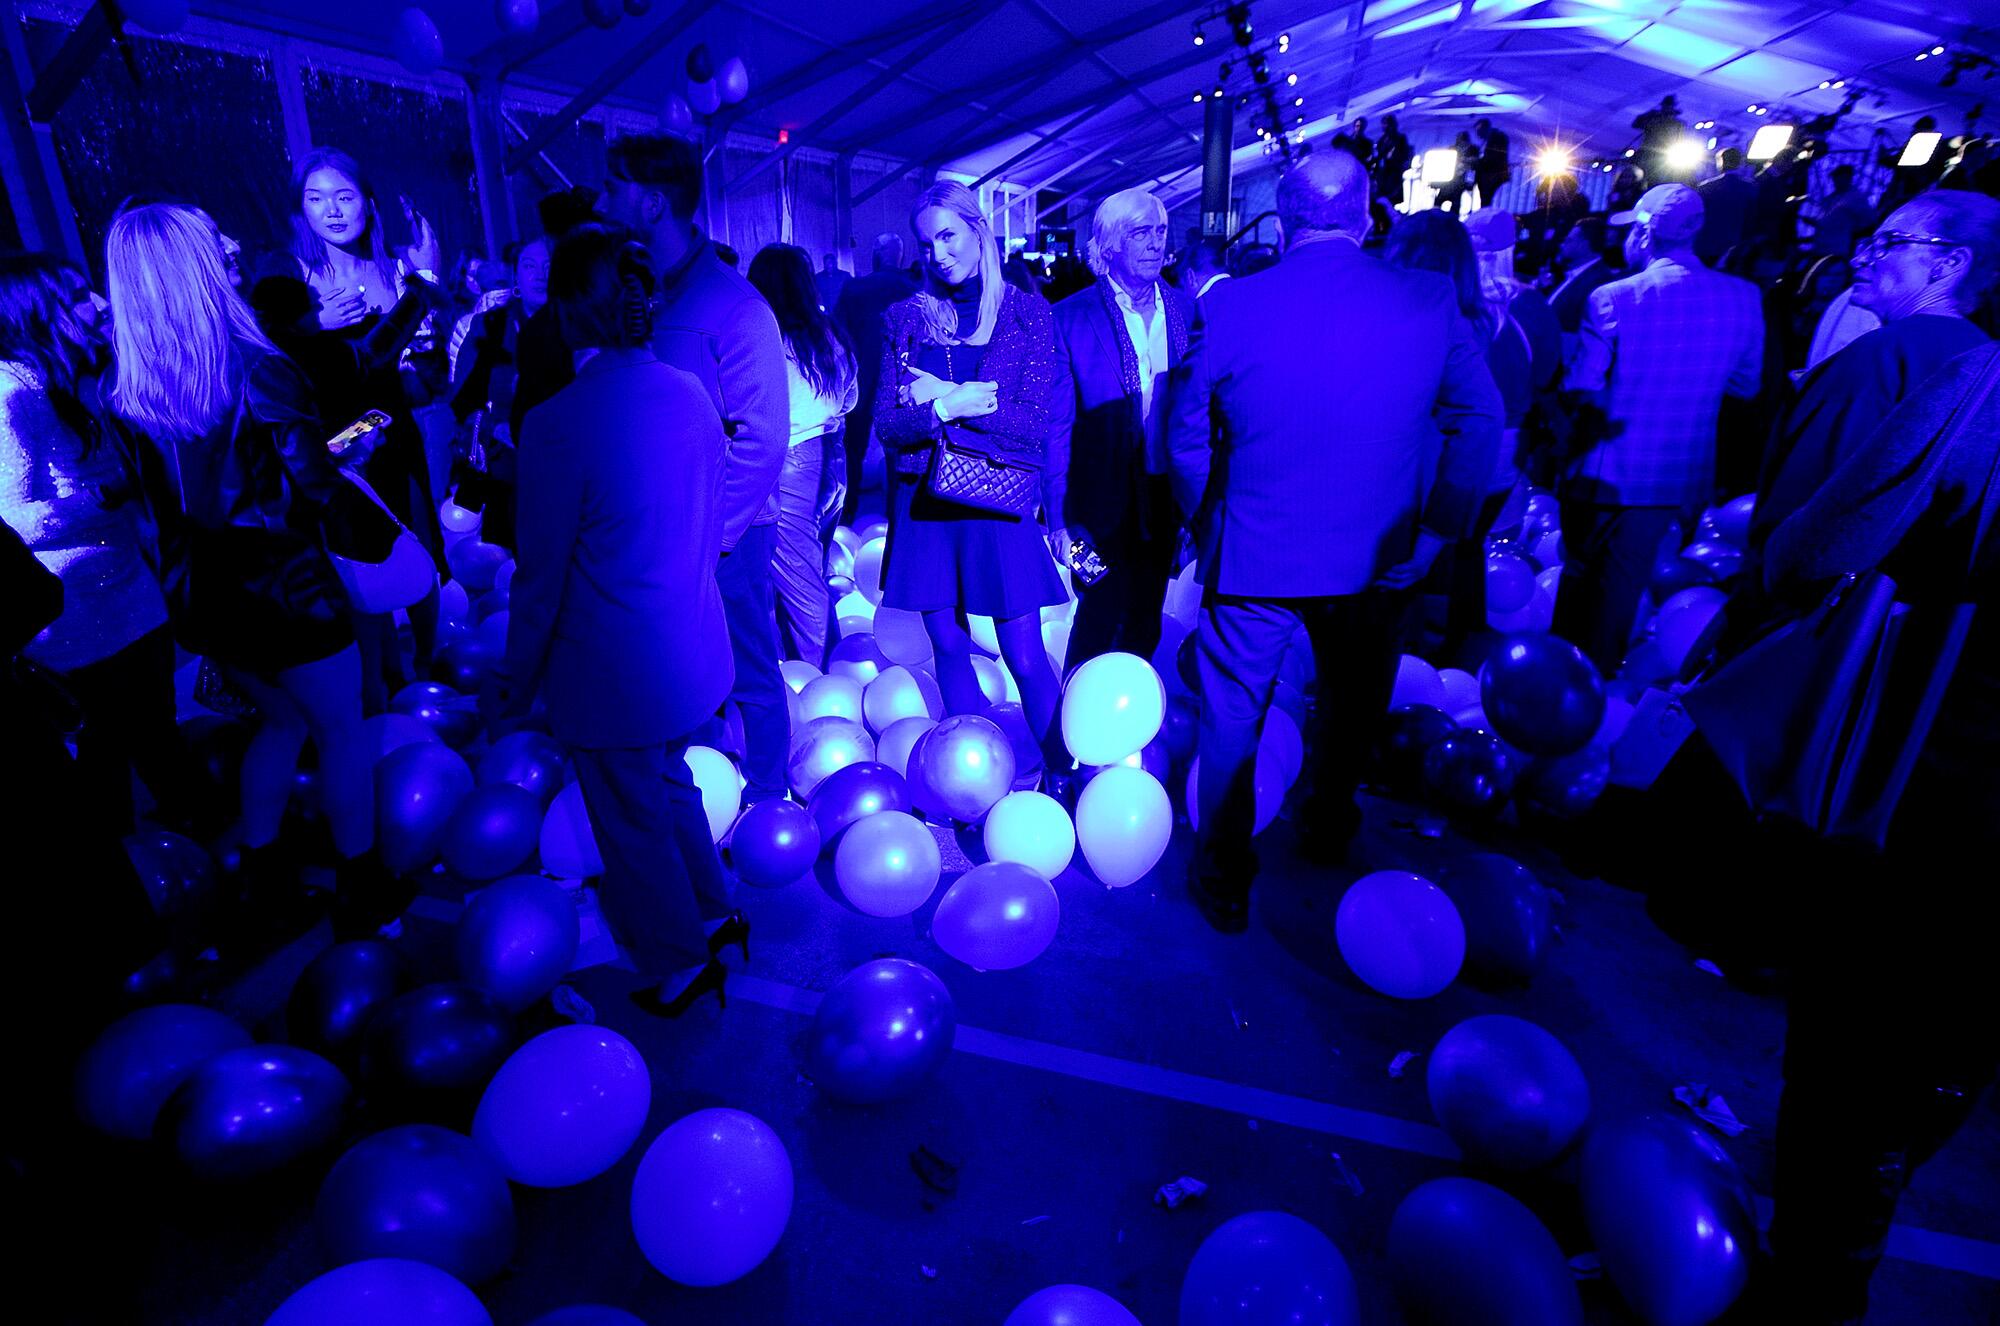 Supporters at Los Angeles mayoral candidate Rick Caruso's election night party in Los Angeles.